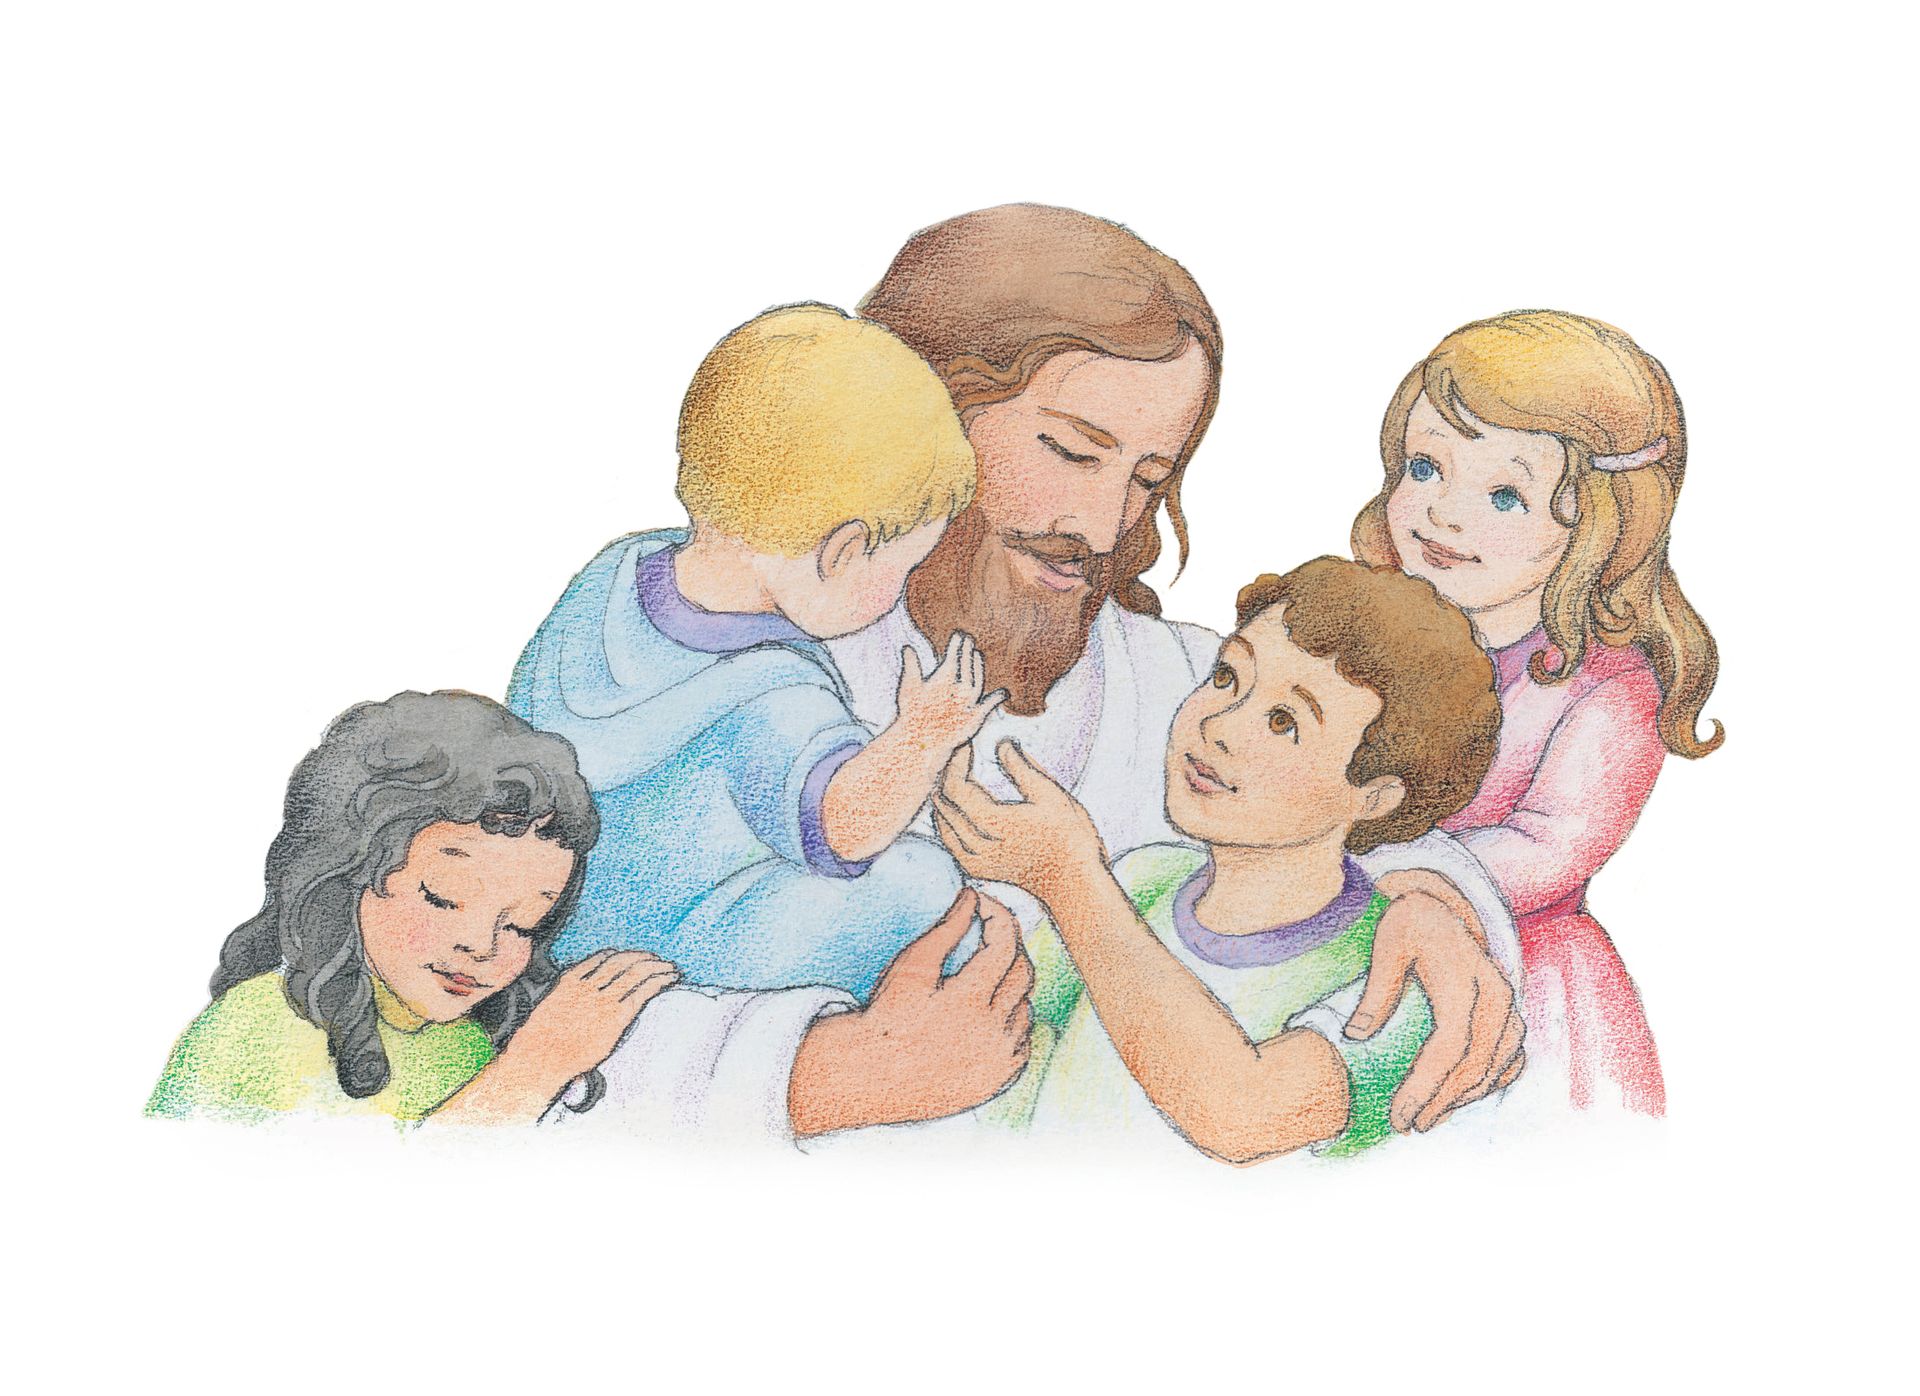 Jesus hugging four children. From the Children’s Songbook, page 82, “When He Comes Again”; watercolor illustration by Phyllis Luch.